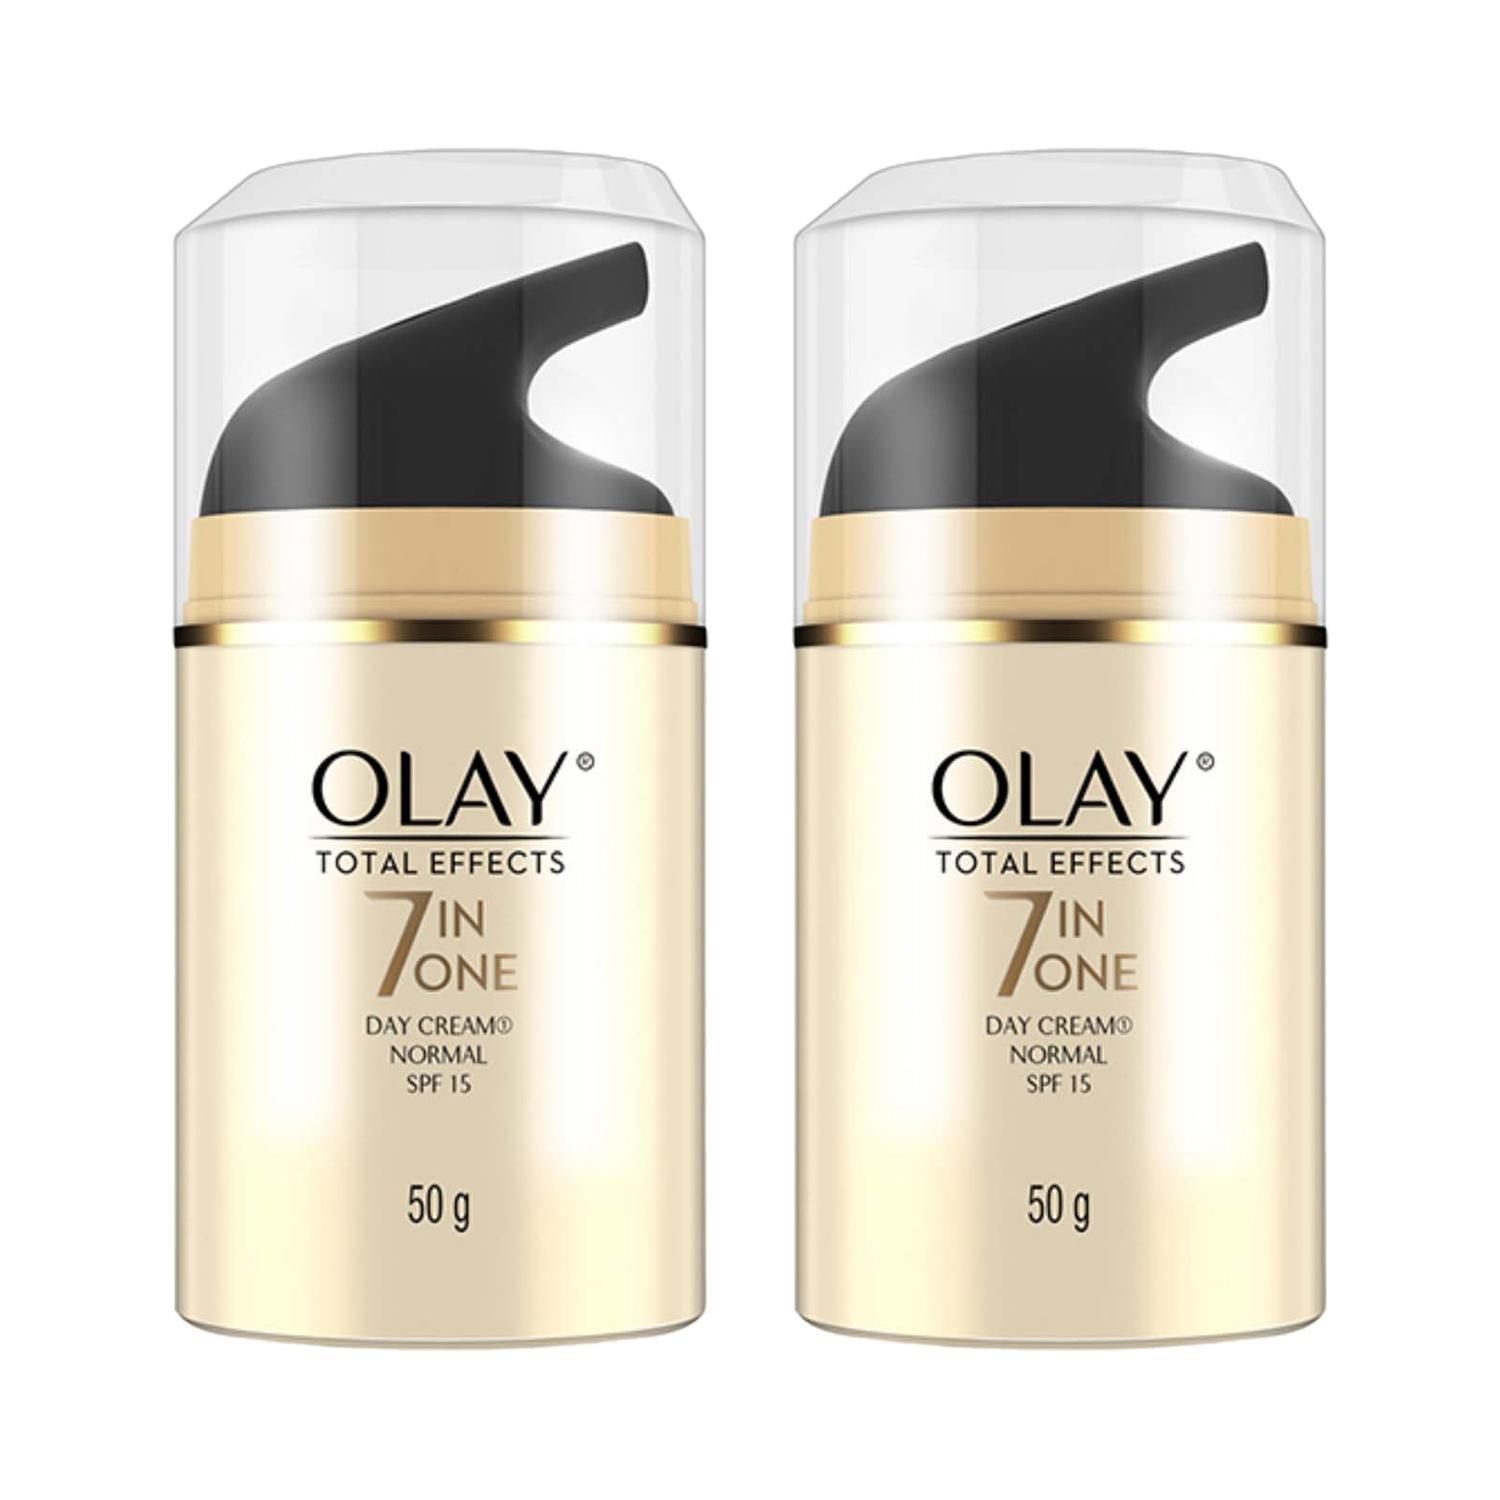 olay 7-in-1 total effects anti ageing day cream spf 15 (50g) (pack of 2) combo